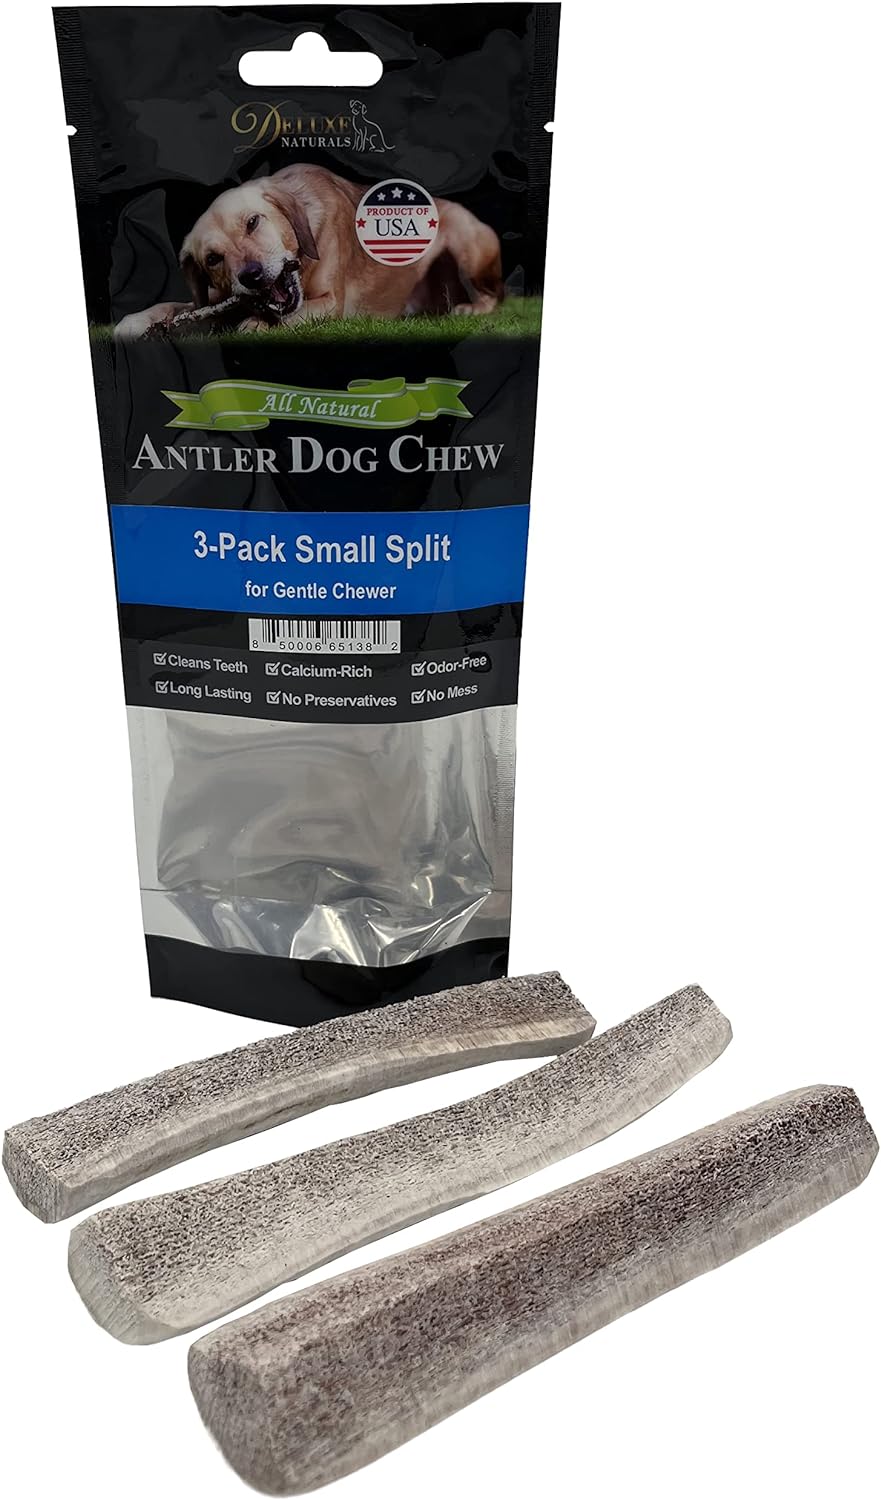 Elk Antler Chews for Dogs | Naturally Shed USA Collected Elk Antlers | All Natural A-Grade Premium Elk Antler Dog Chews | Product of USA, 3-Pack Small Split